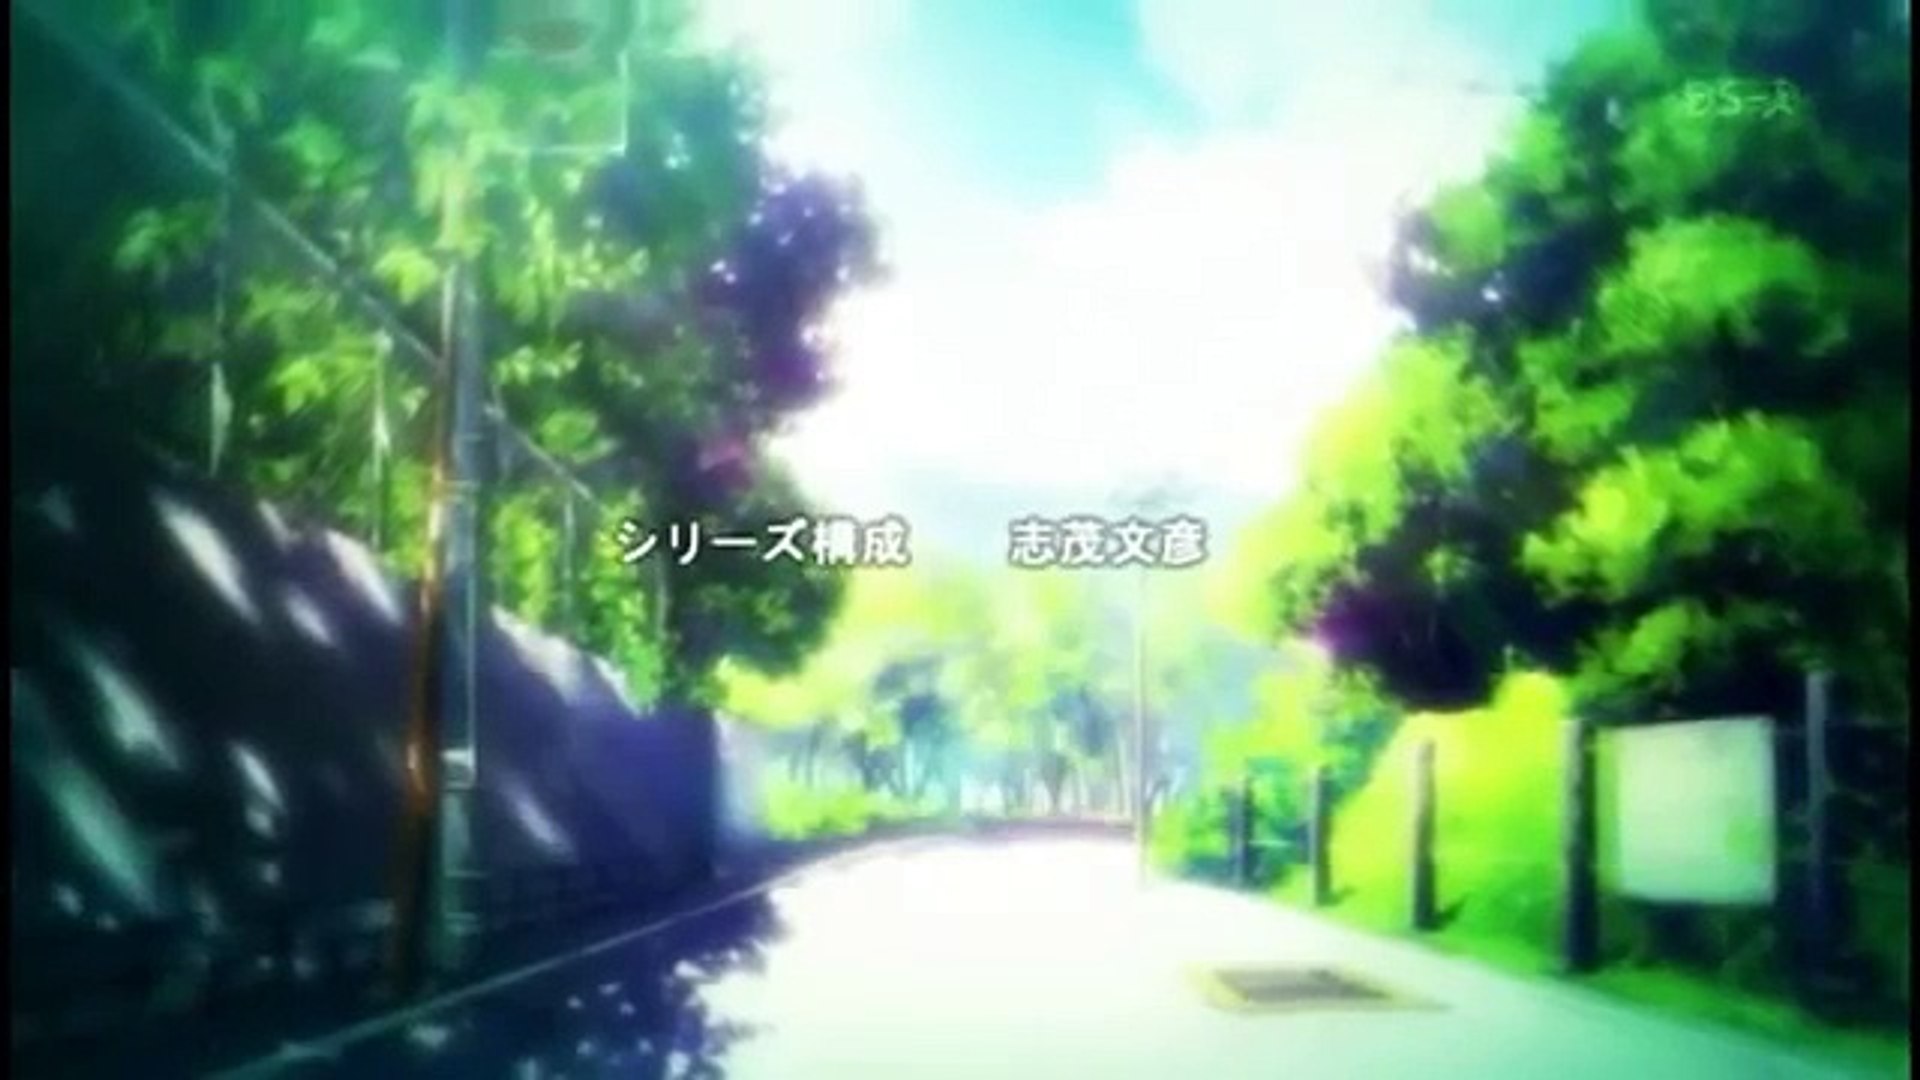 Clannad After Story Opening [Full HD] on Vimeo